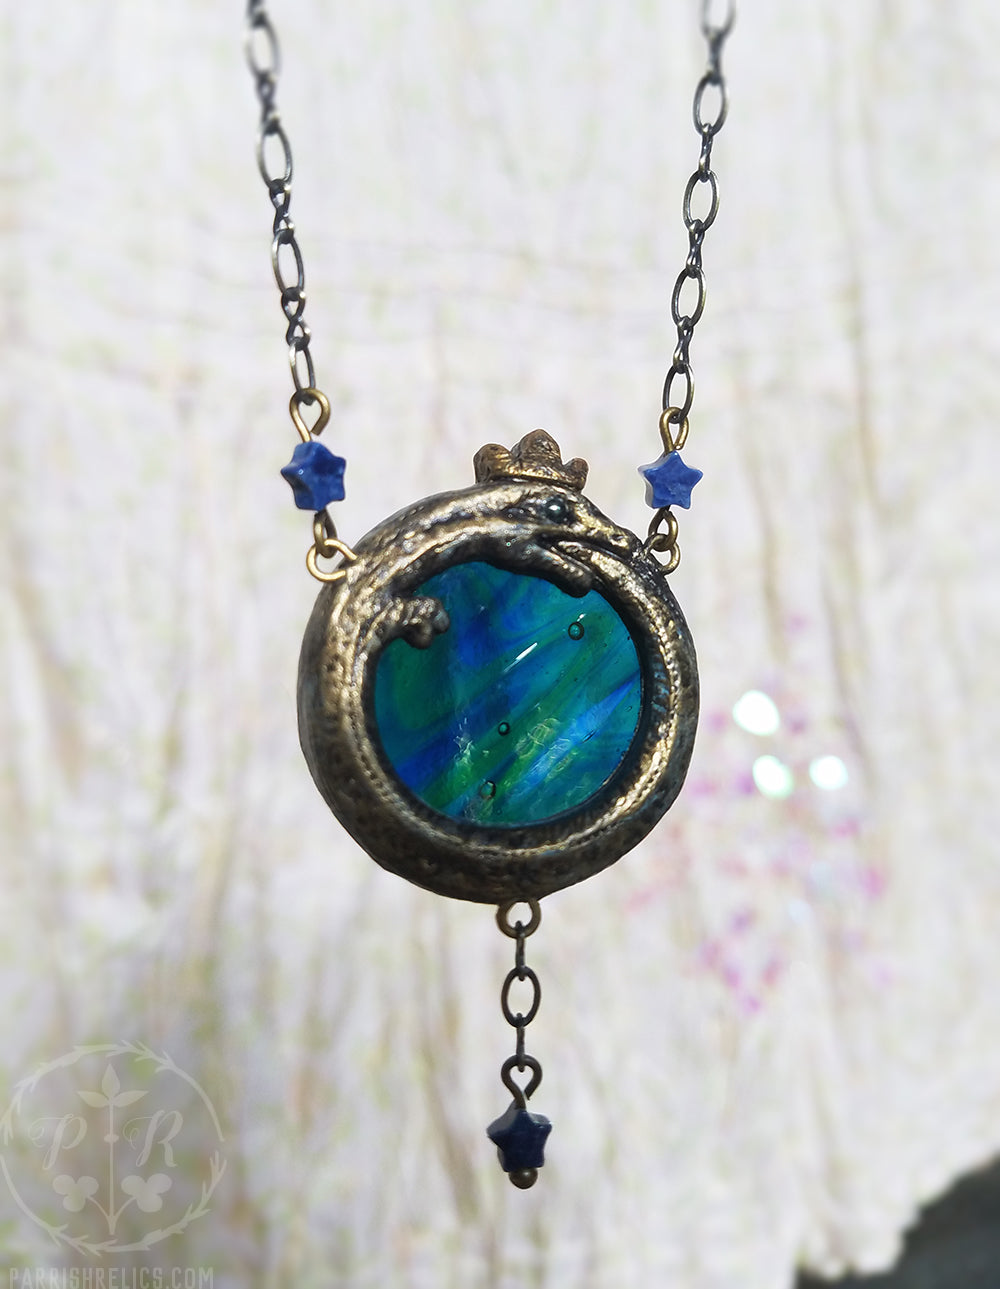 Gaia Ouroboros ~ Stained Glass Amulet